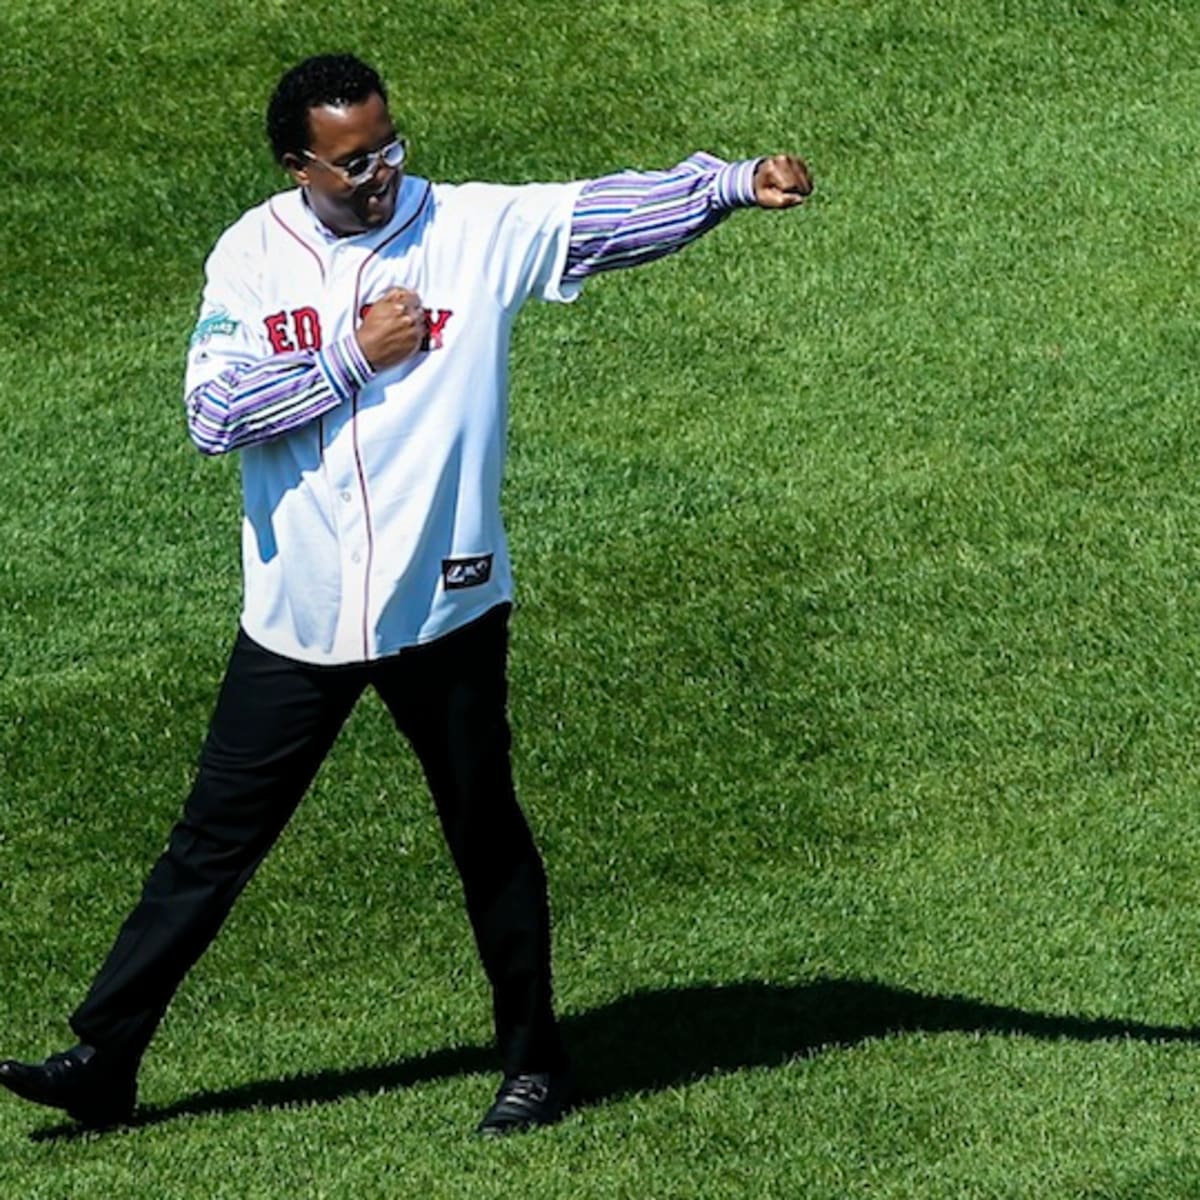 Pedro Martinez's Hall of Fame plaque features his Hheri curl